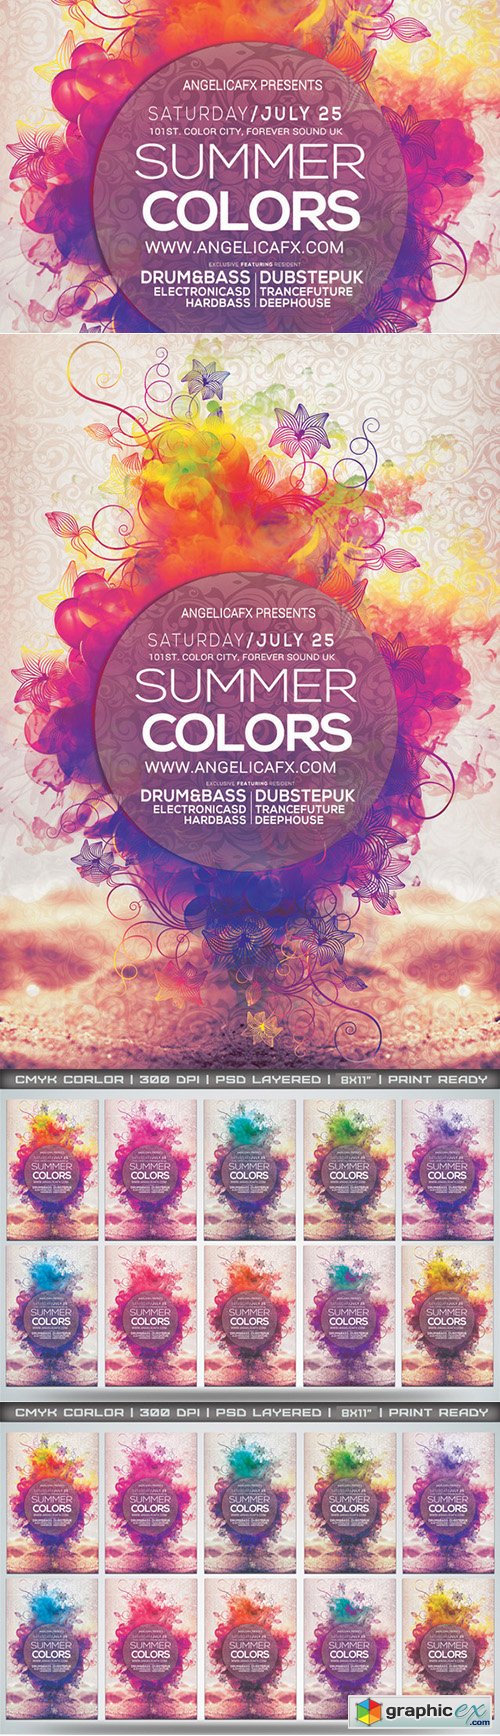  Summer Colors Flyer Template